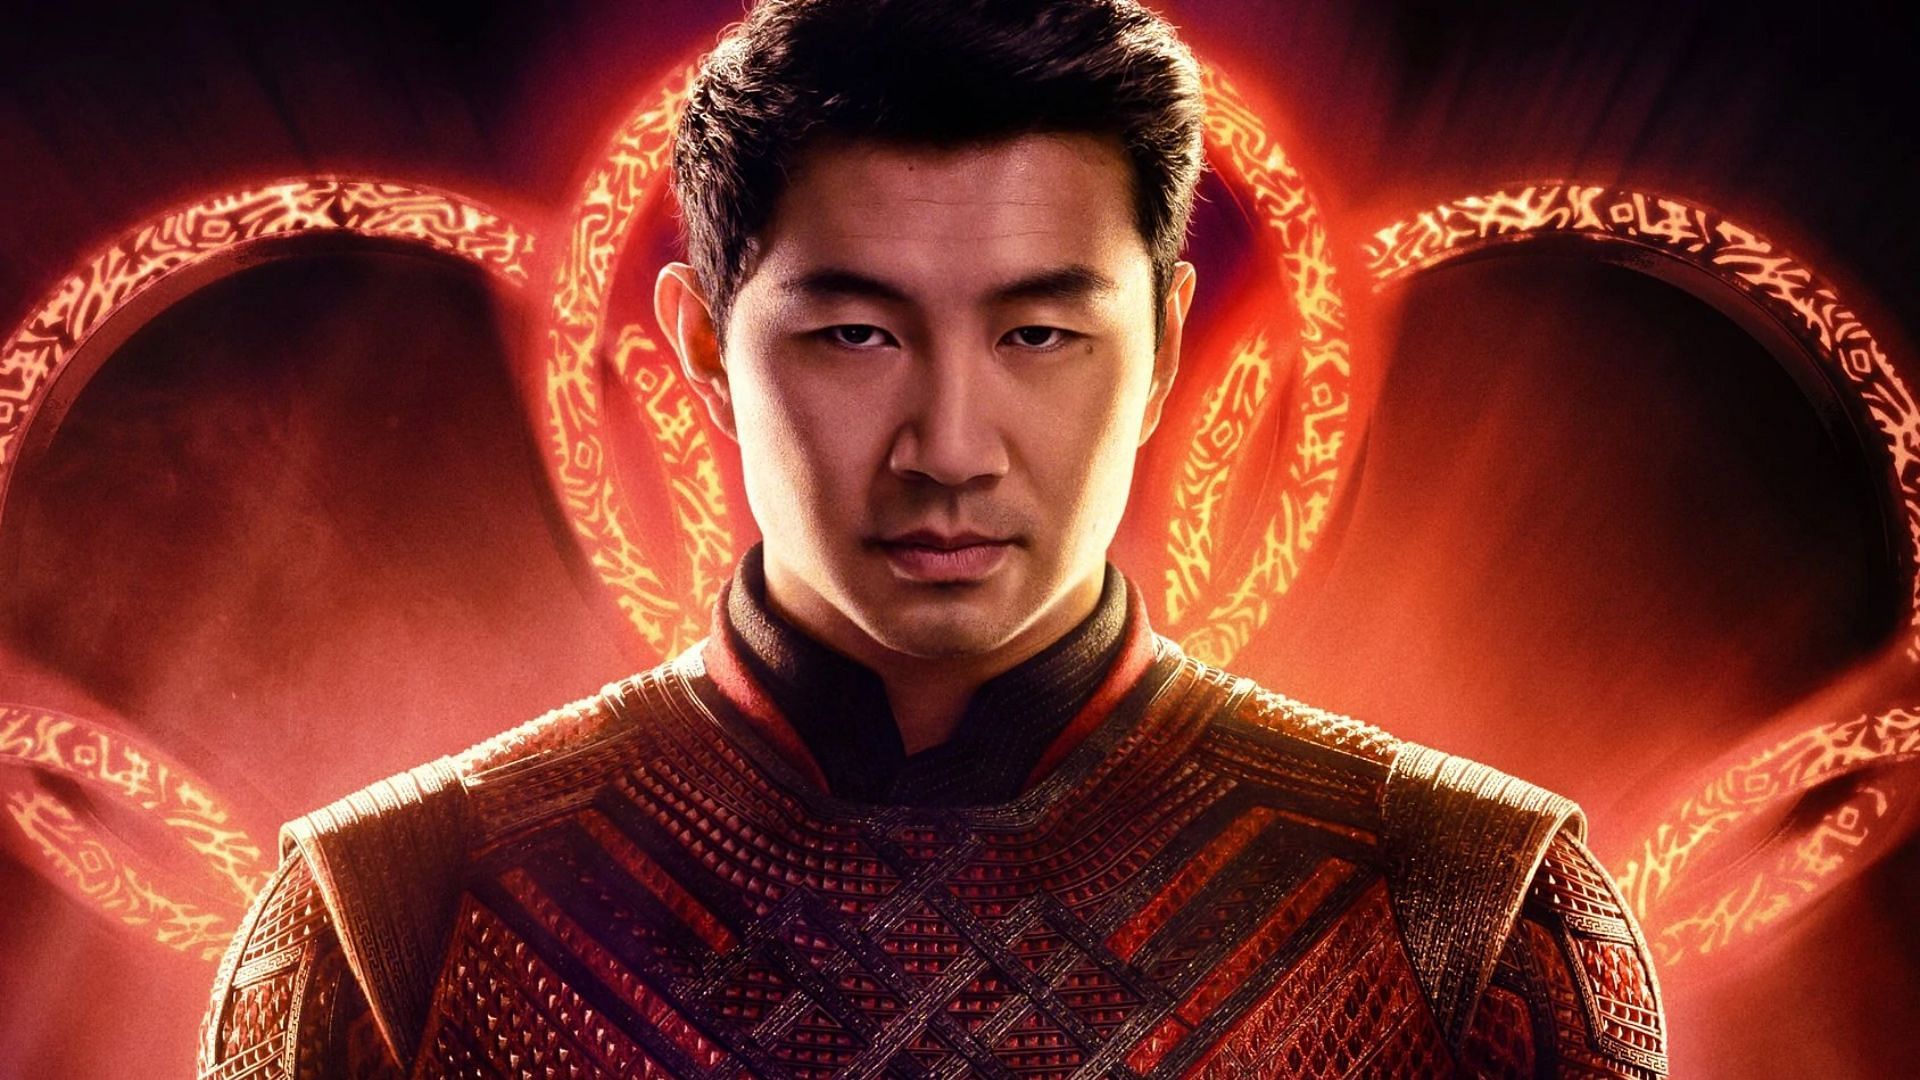 Shang-Chi from the 2021 MCU film (image via Marvel)